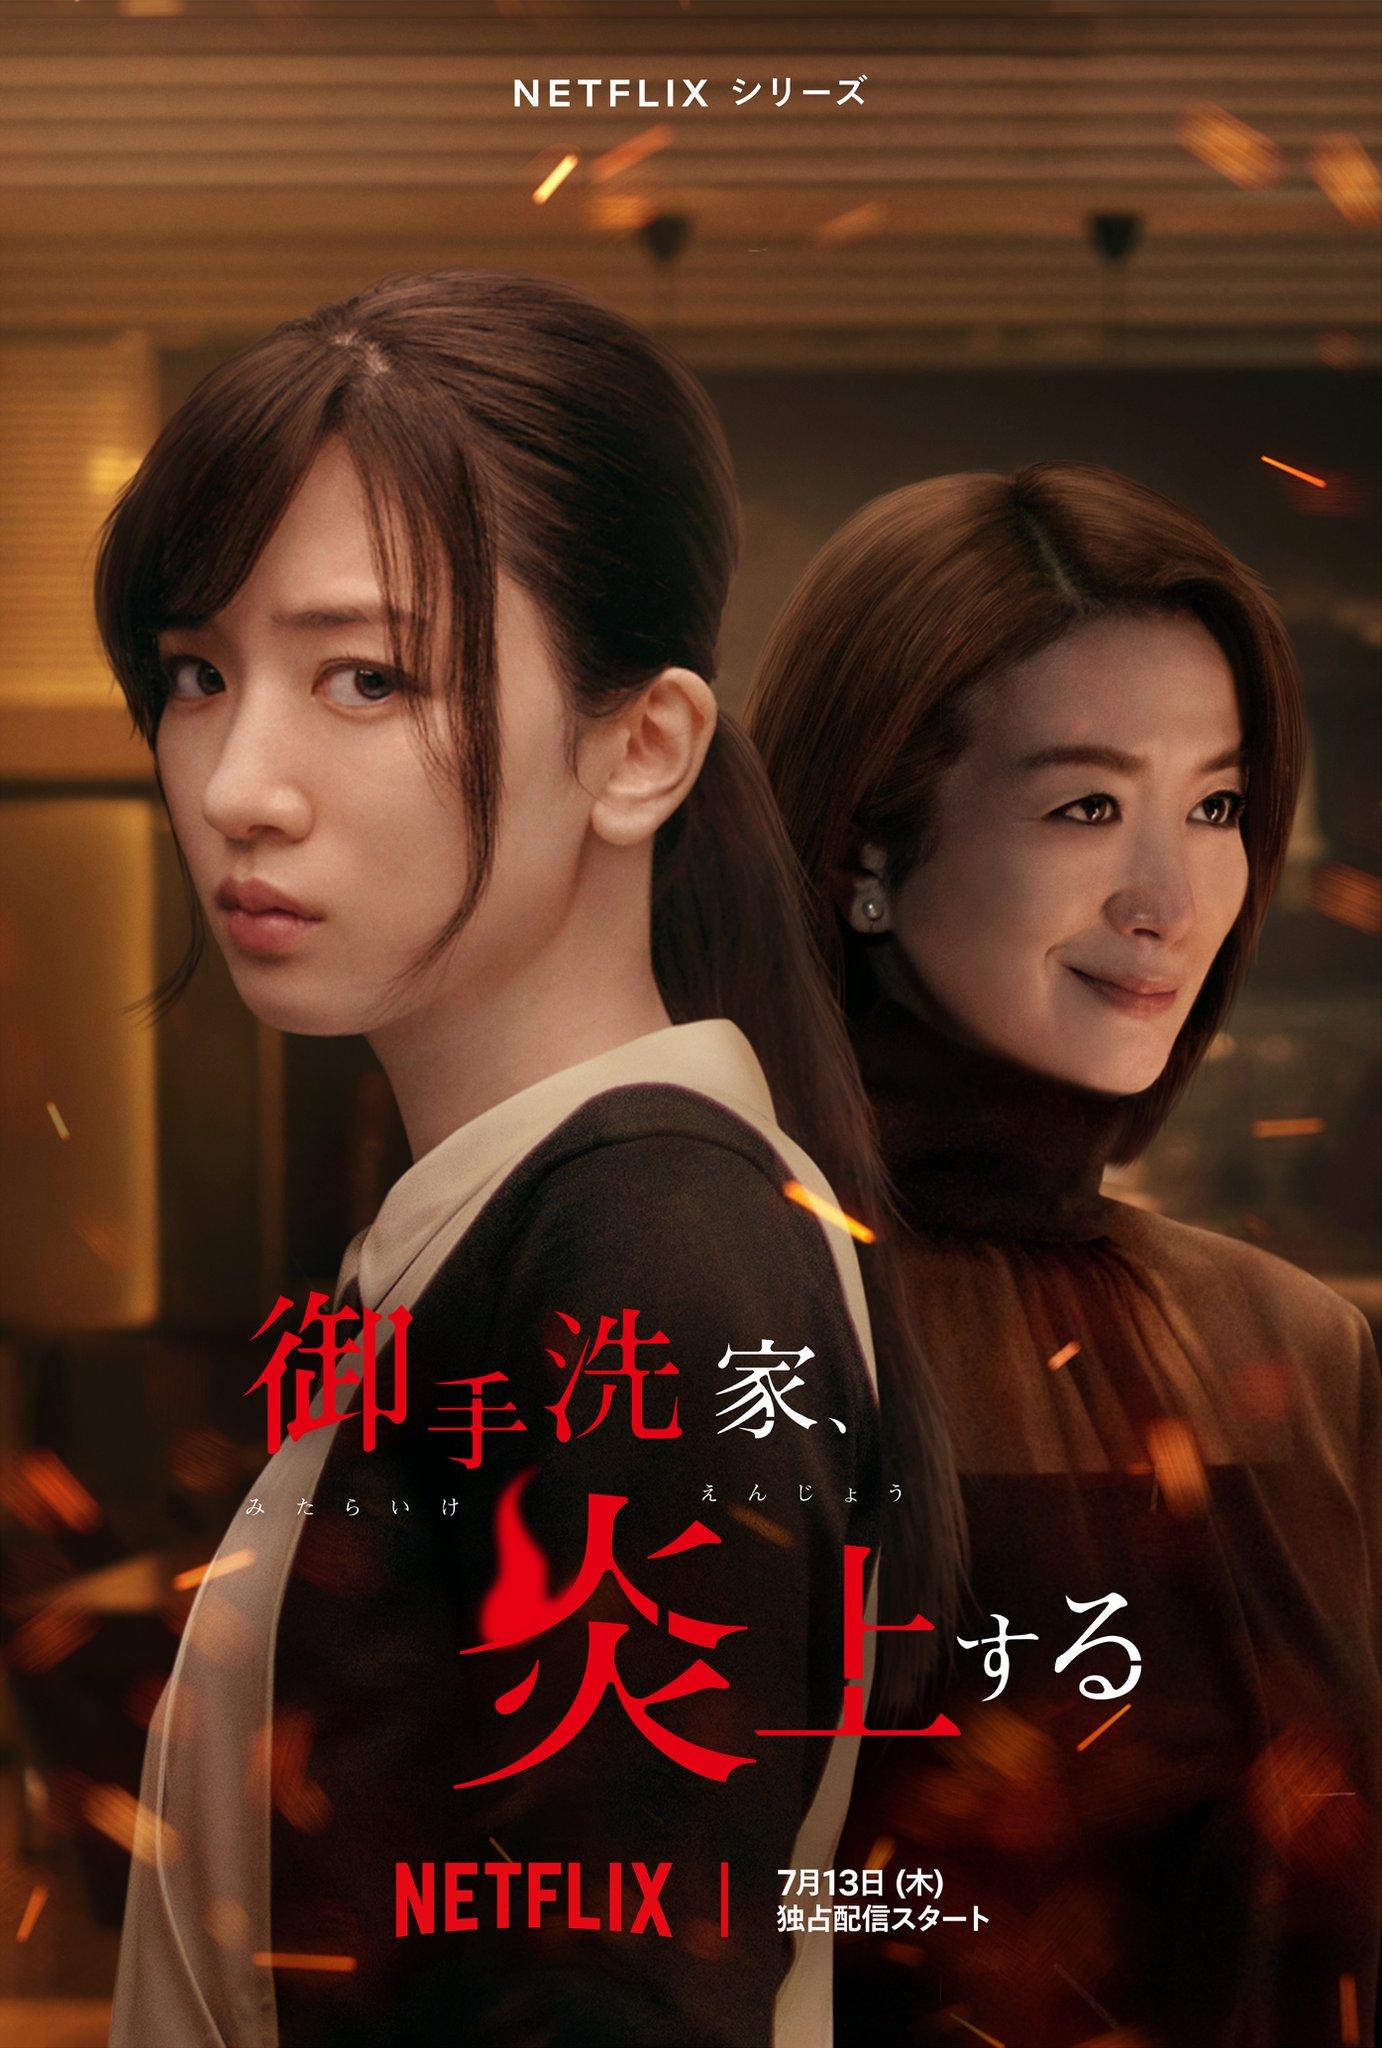 Follow the journey of Anzu Murata, who after thirteen years after the wealthy Mitarai family was burned in an fire, infiltrates the house of the Mitarais as a house help in order to take back the house and family that was taken from her.